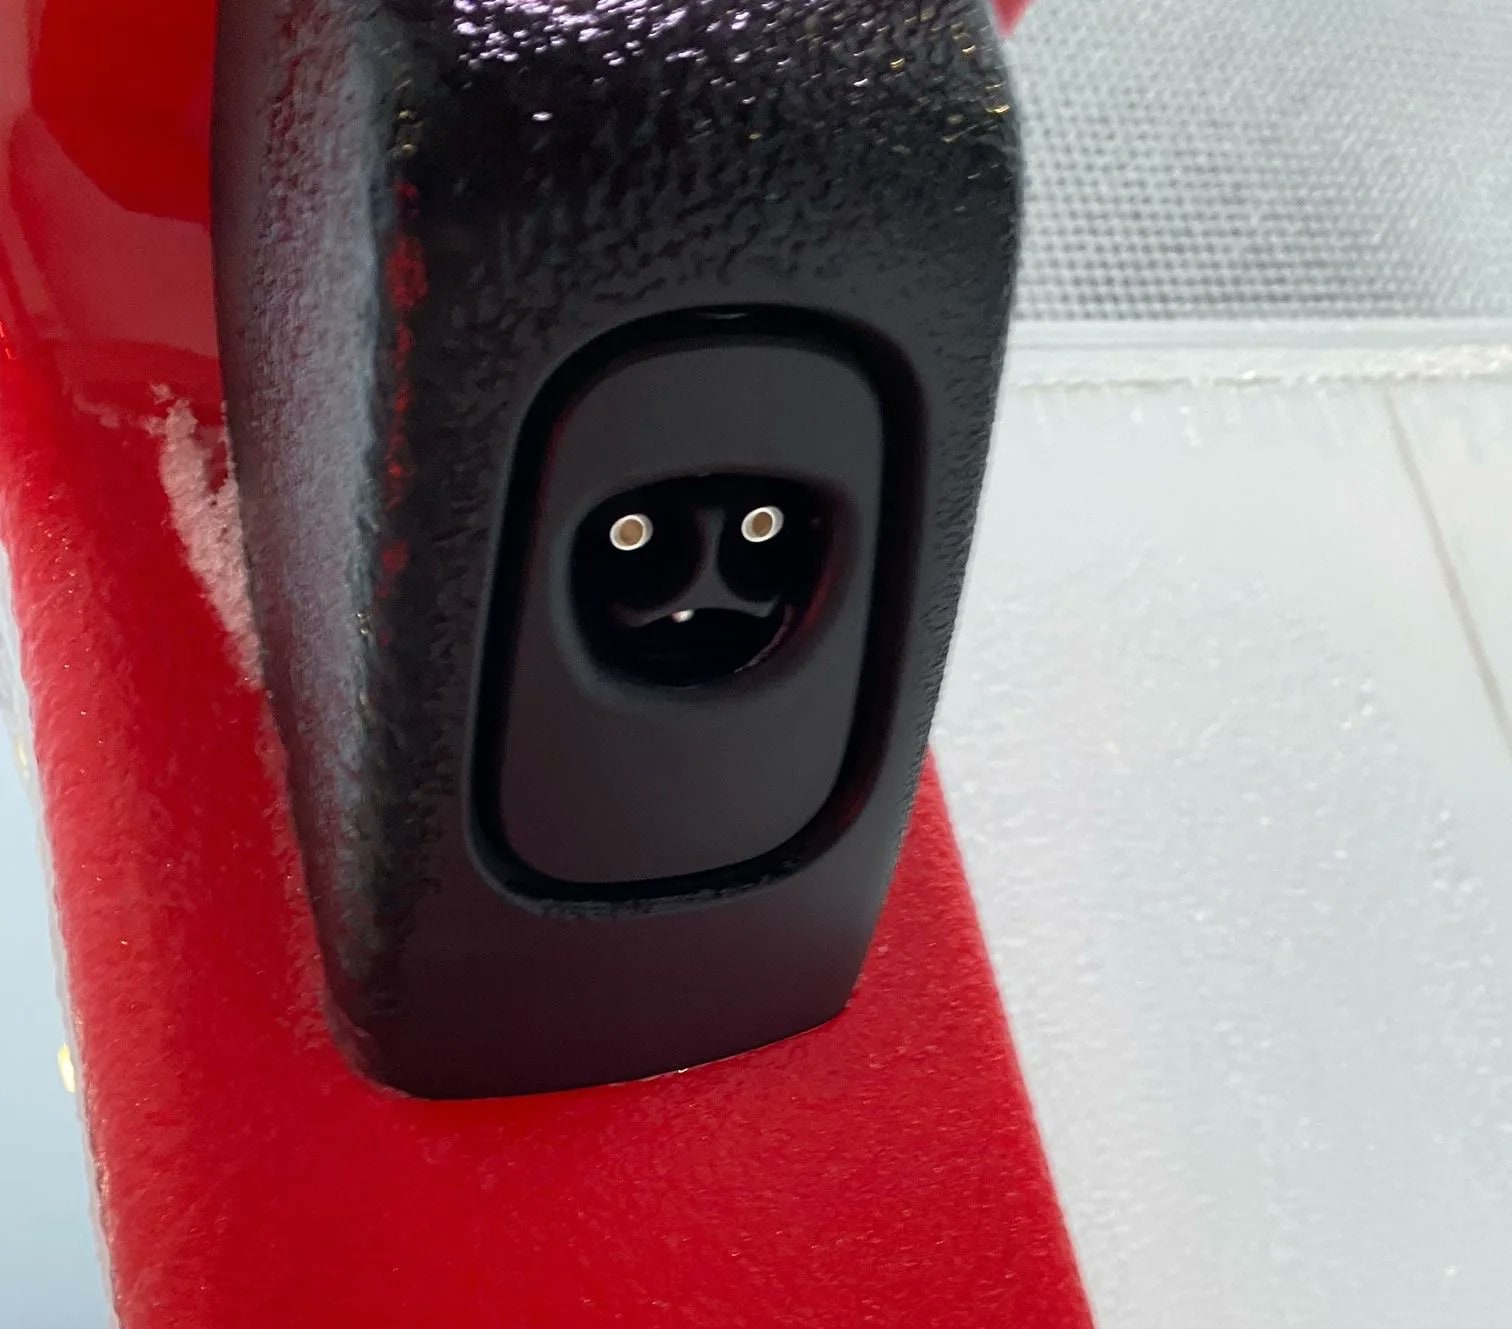 Tesla has started to install Magic Docks at several locations